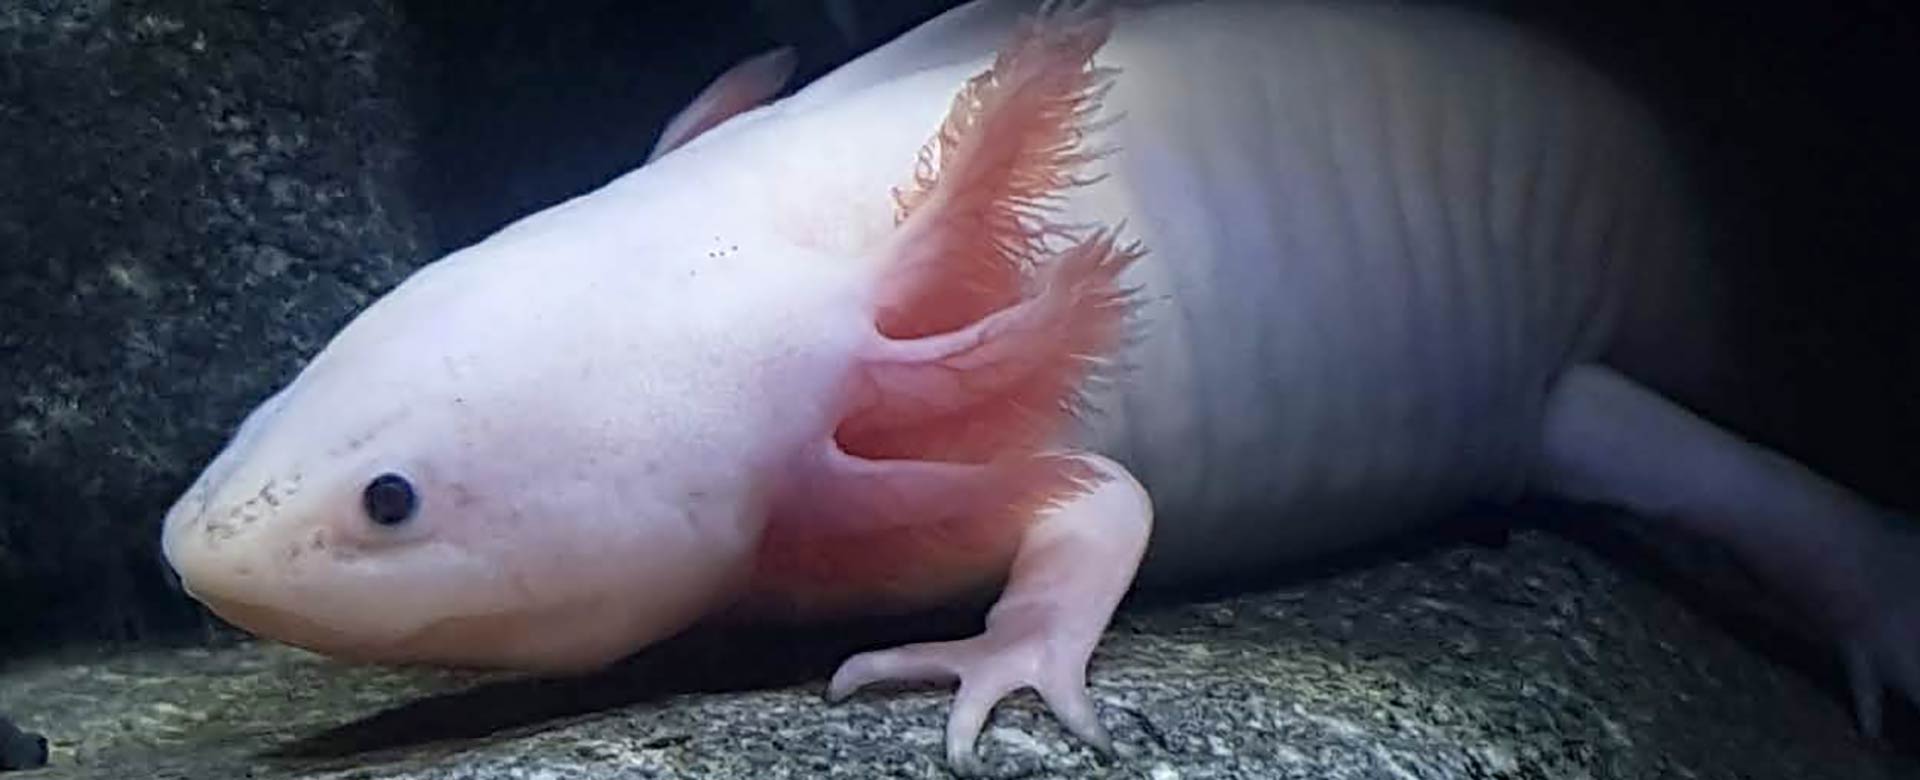 axolotl the disappearing water monster photo